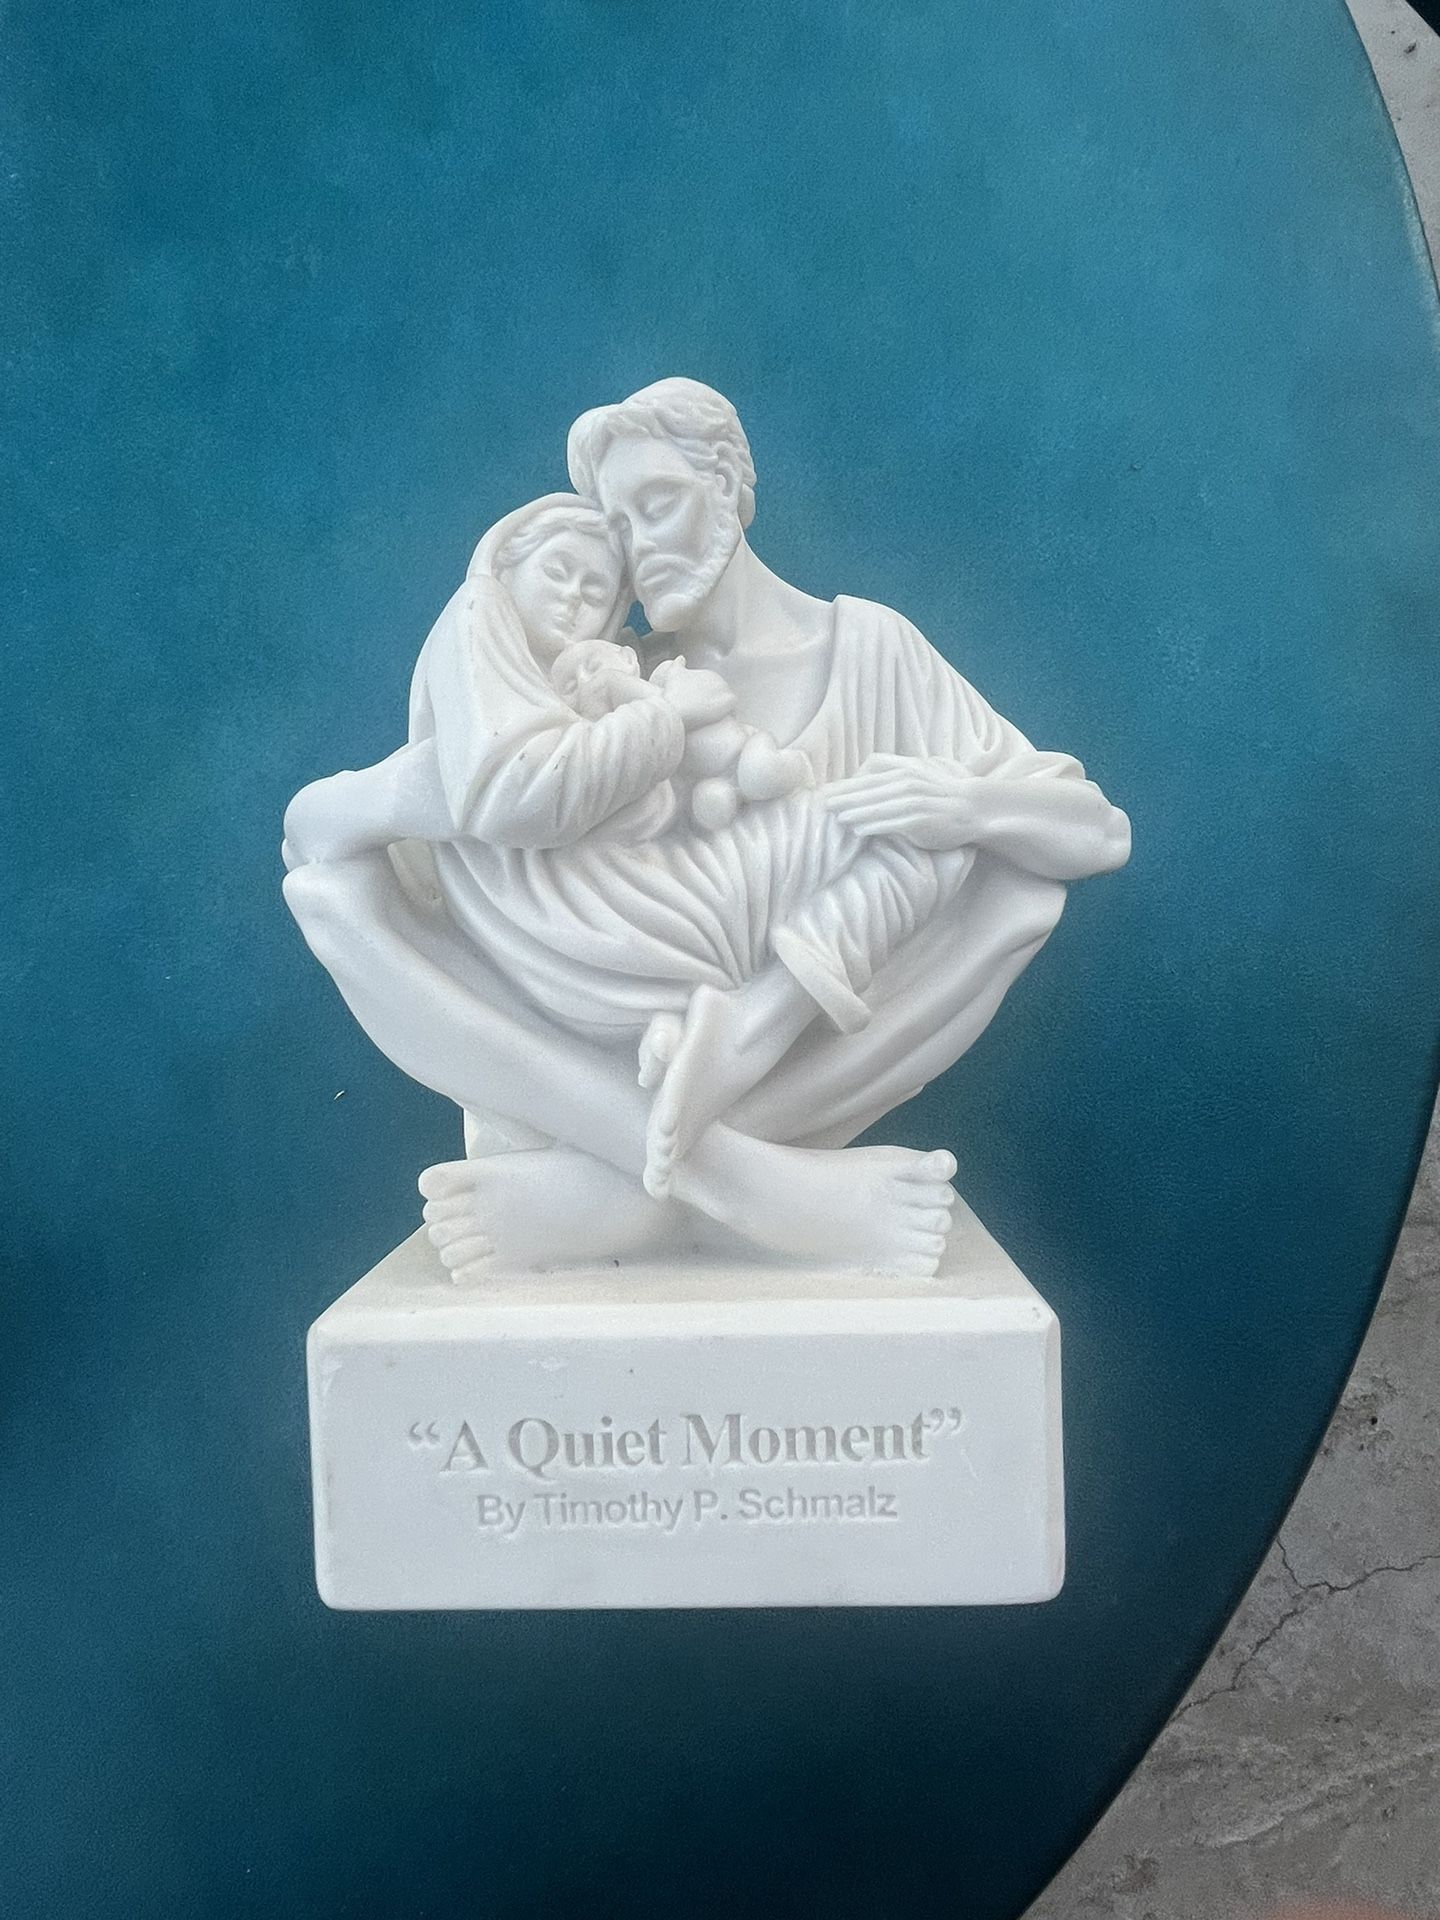 Beautiful "A Quiet Moment" Holy Family Sculpture by Timothy P. Schmalz.  In a tender moment of Jesus's birth, with the Blessed Mother - St. Mary, and 